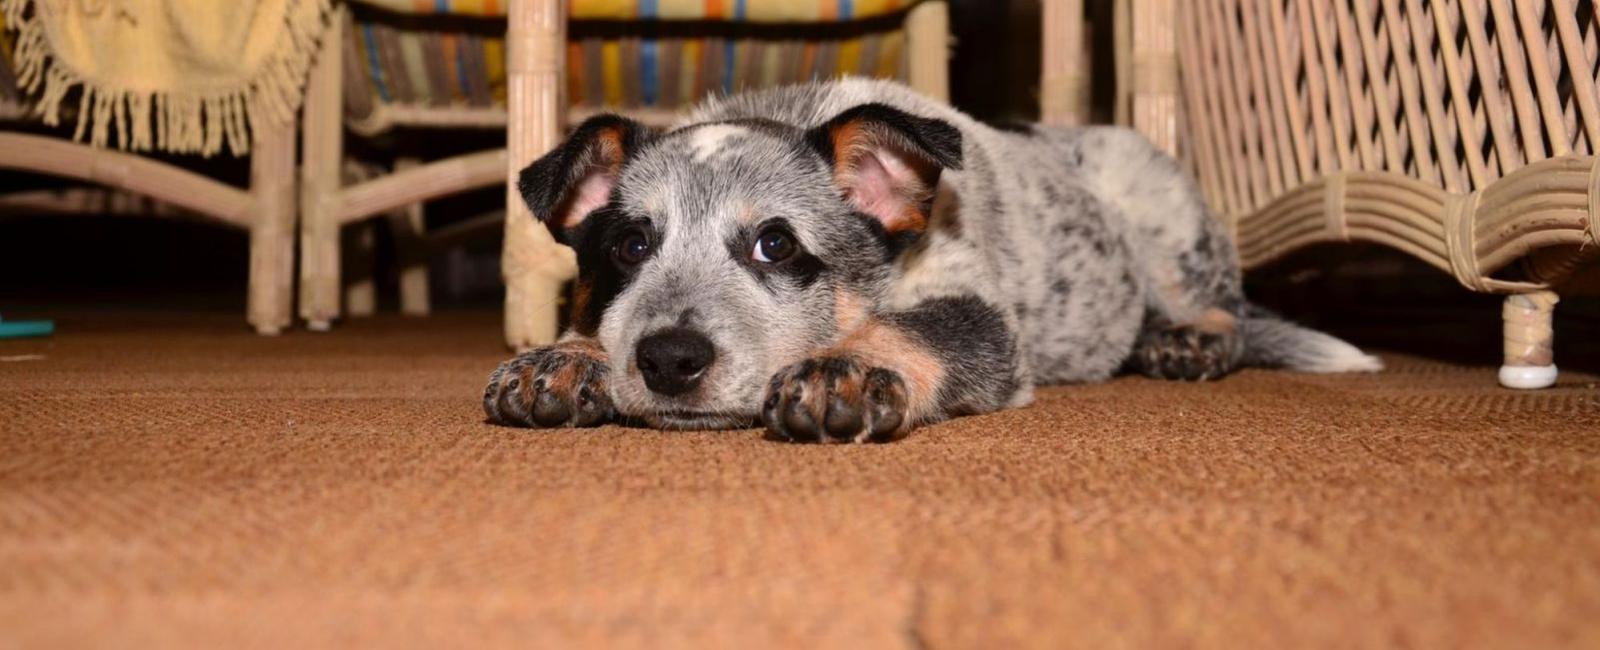 Puppy Digging in Crate? Here's Why & What to Do